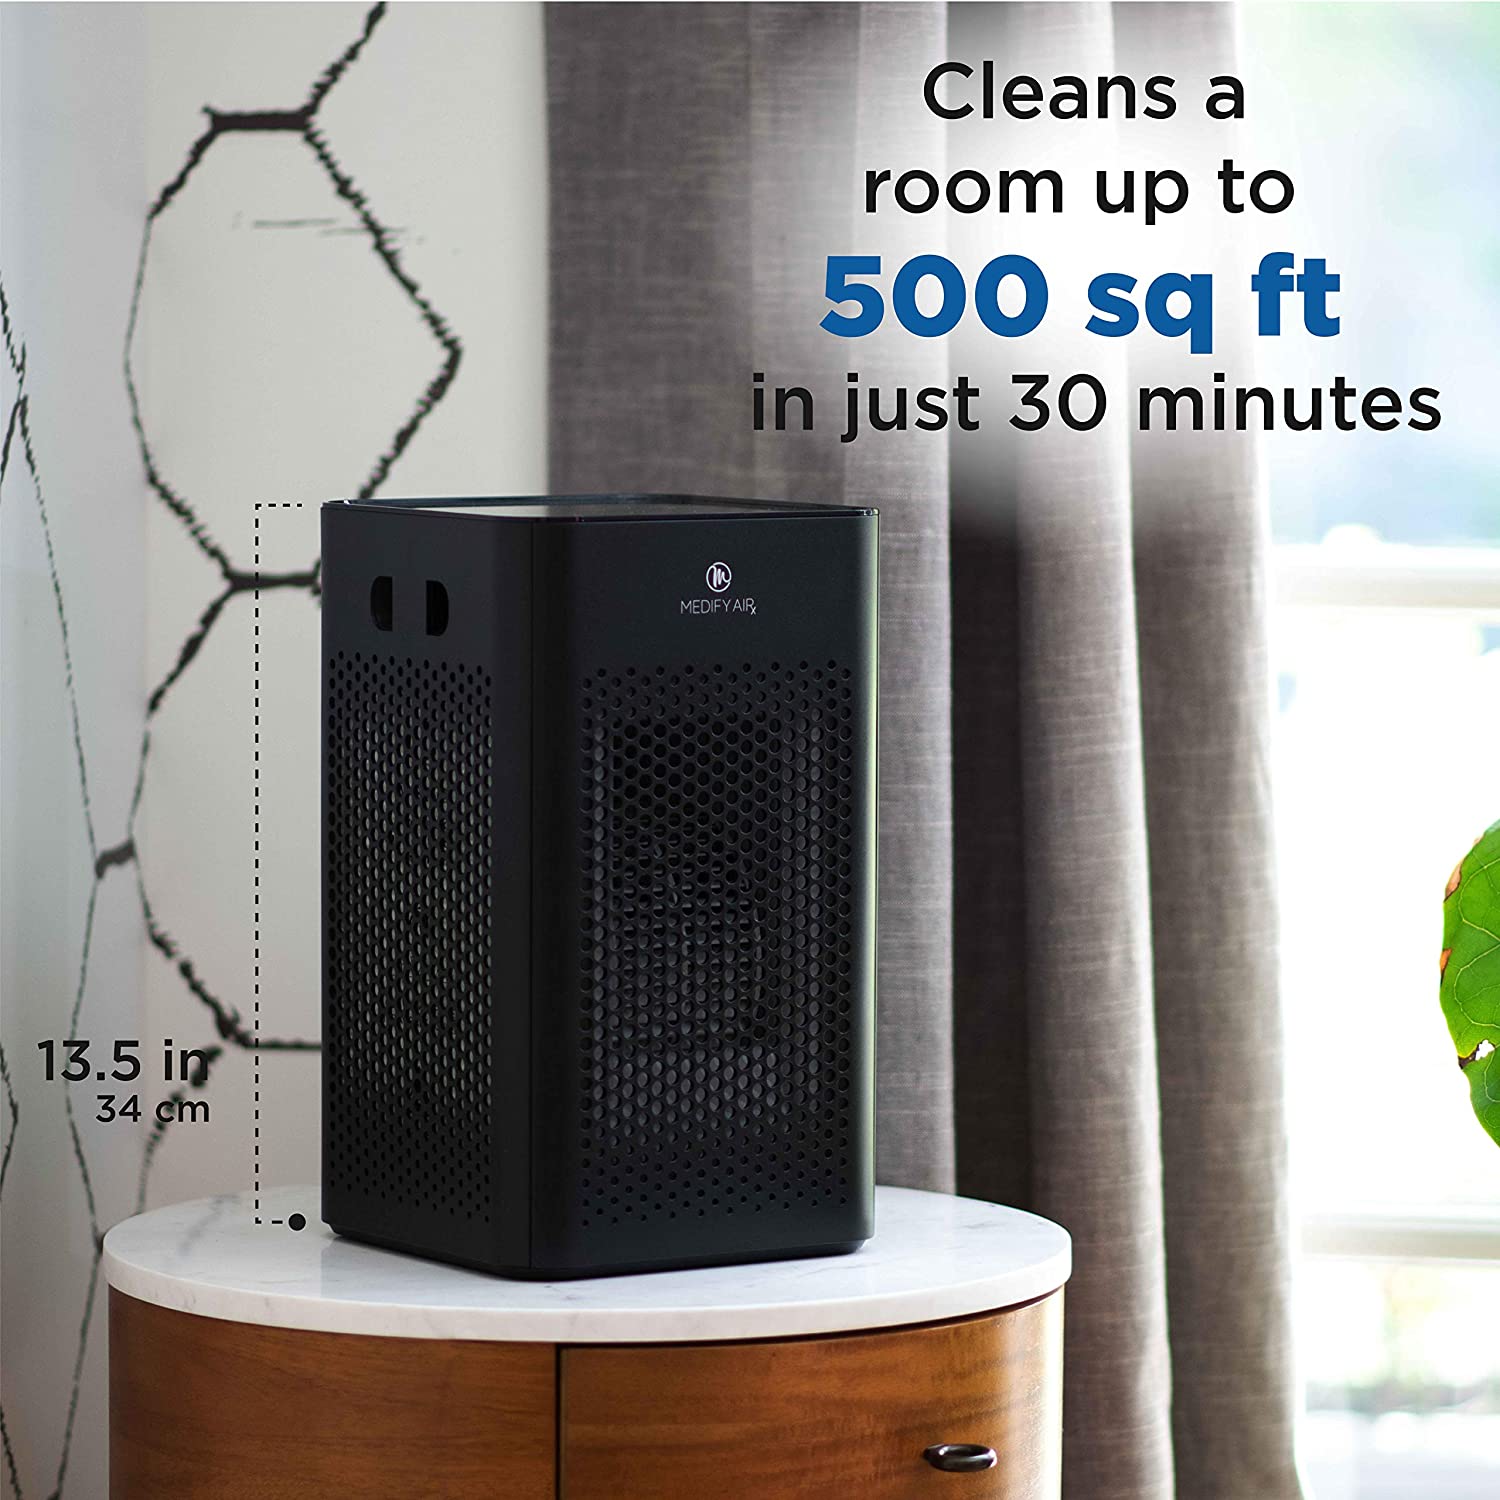 The Medify MA-25 Air Purifier has two on-board filters for air purification